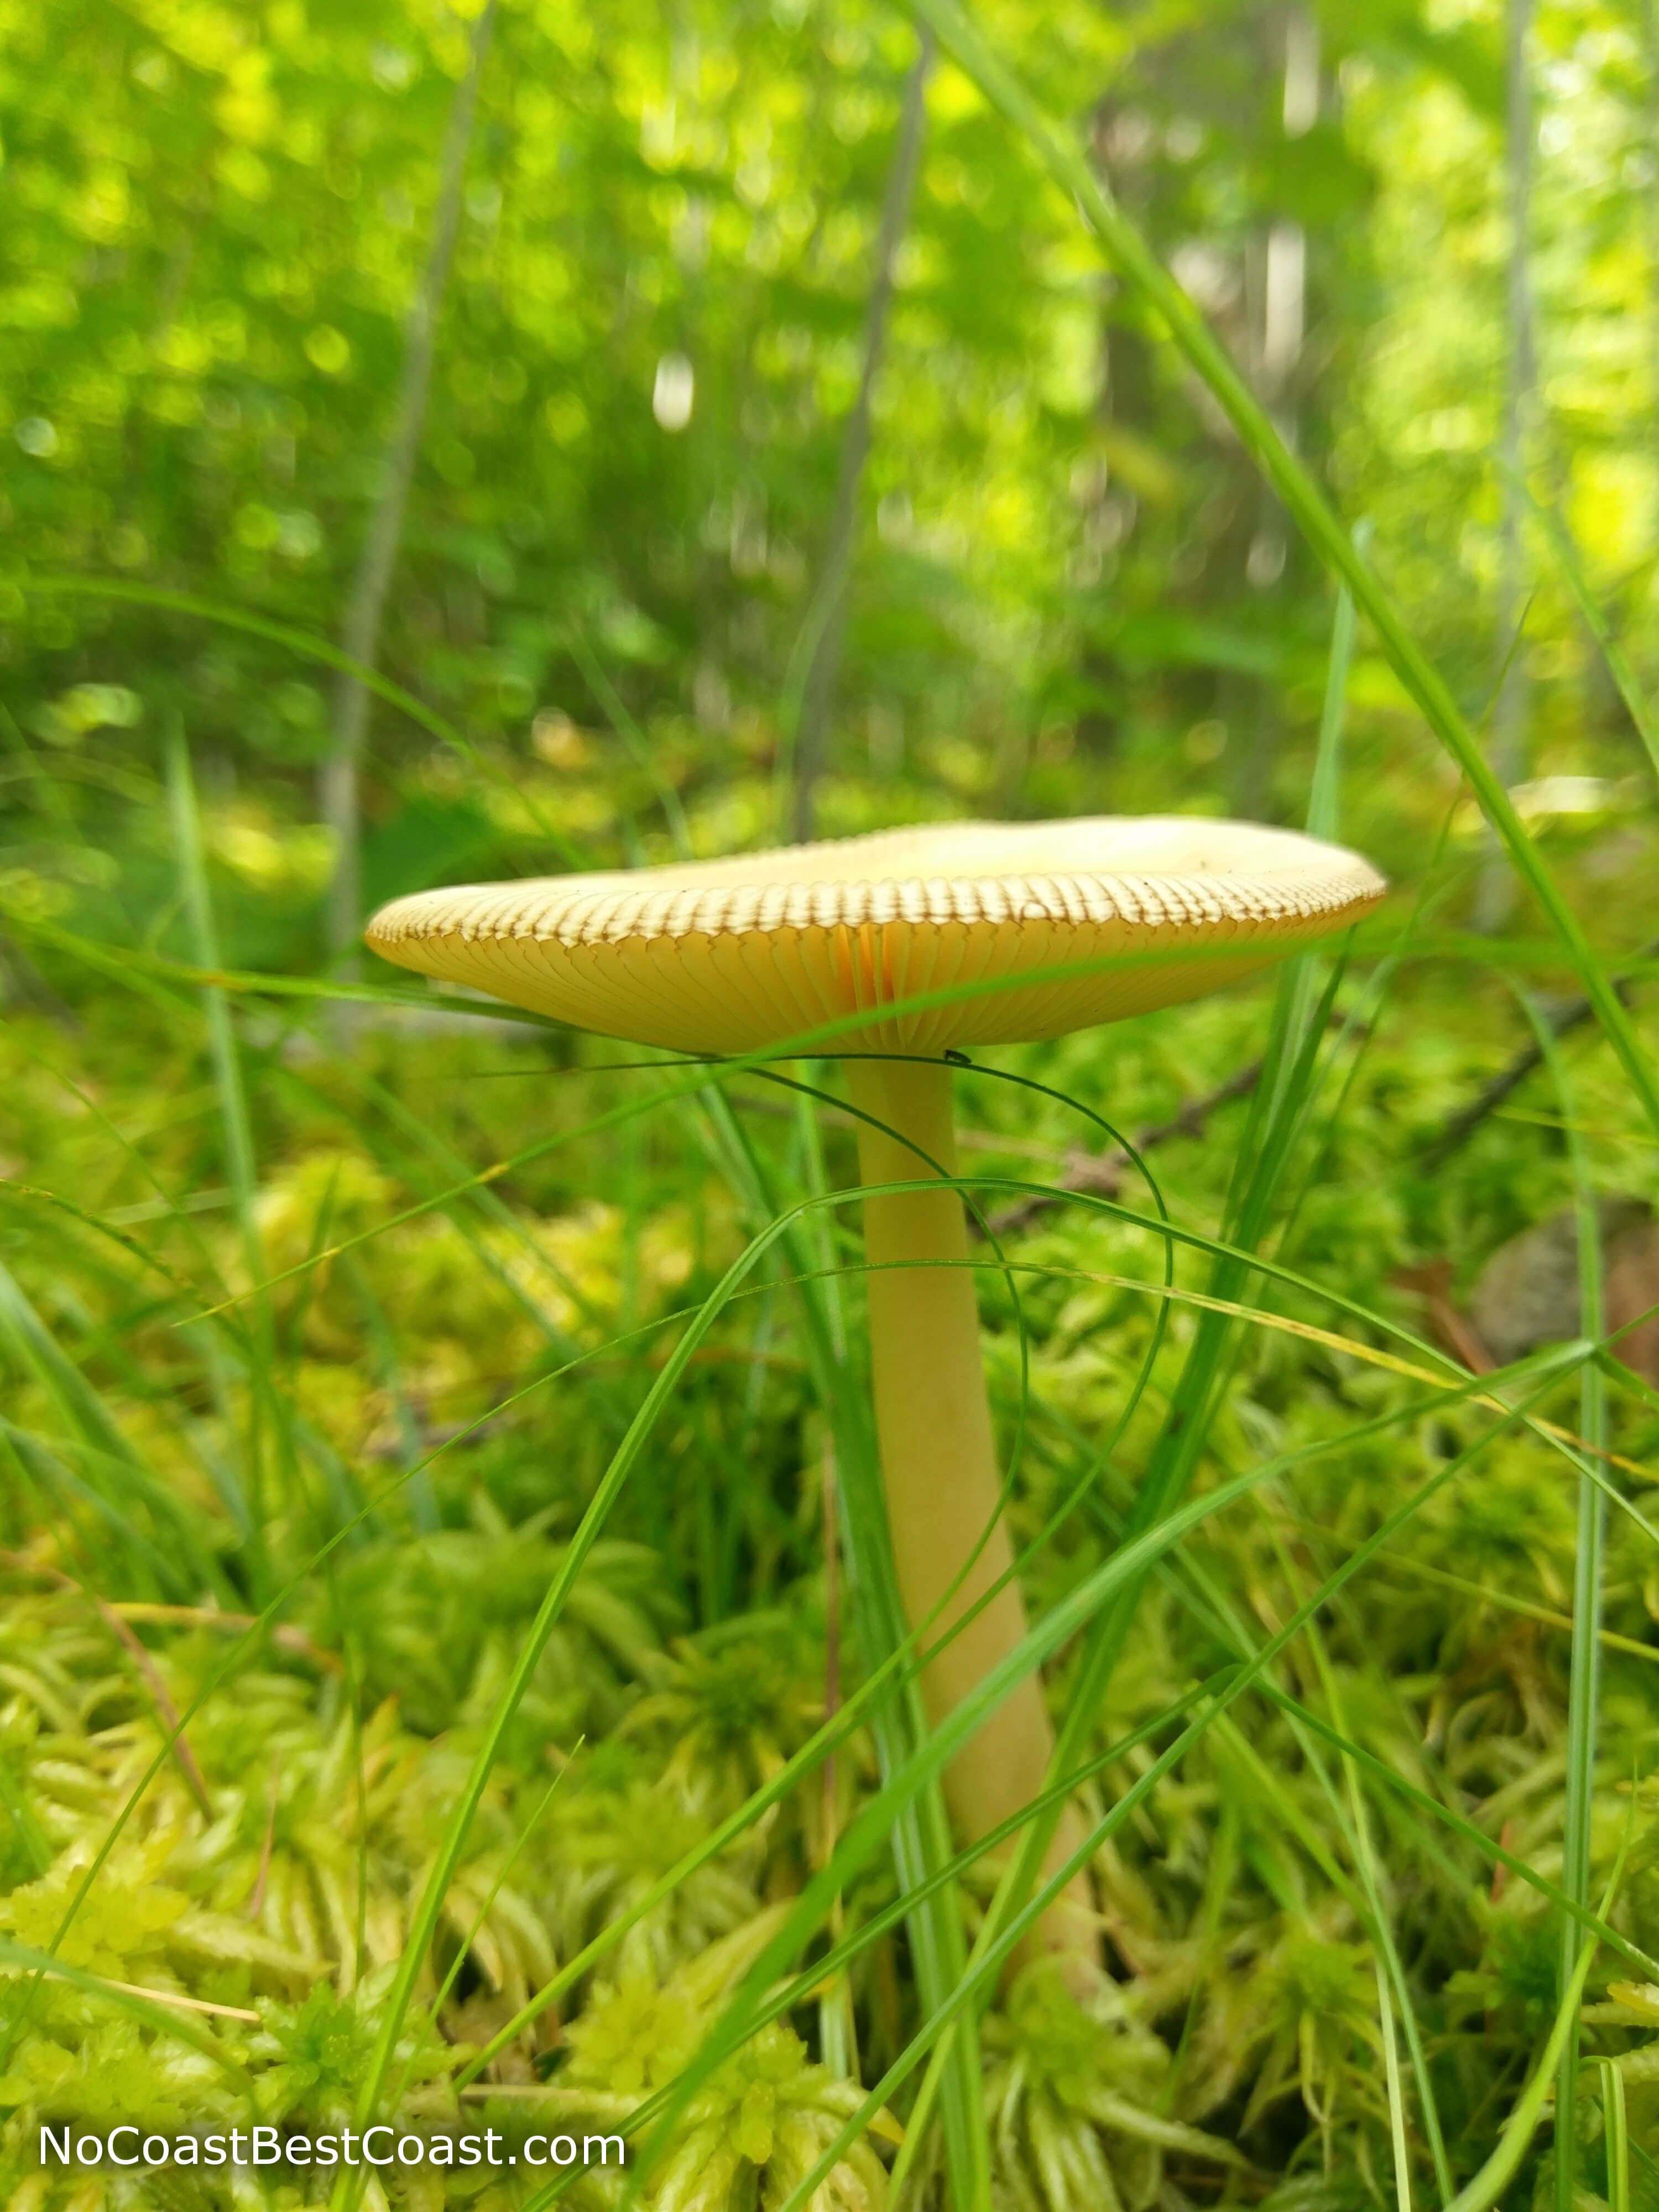 This mushroom is just one of the unique sights you'll see in the bog